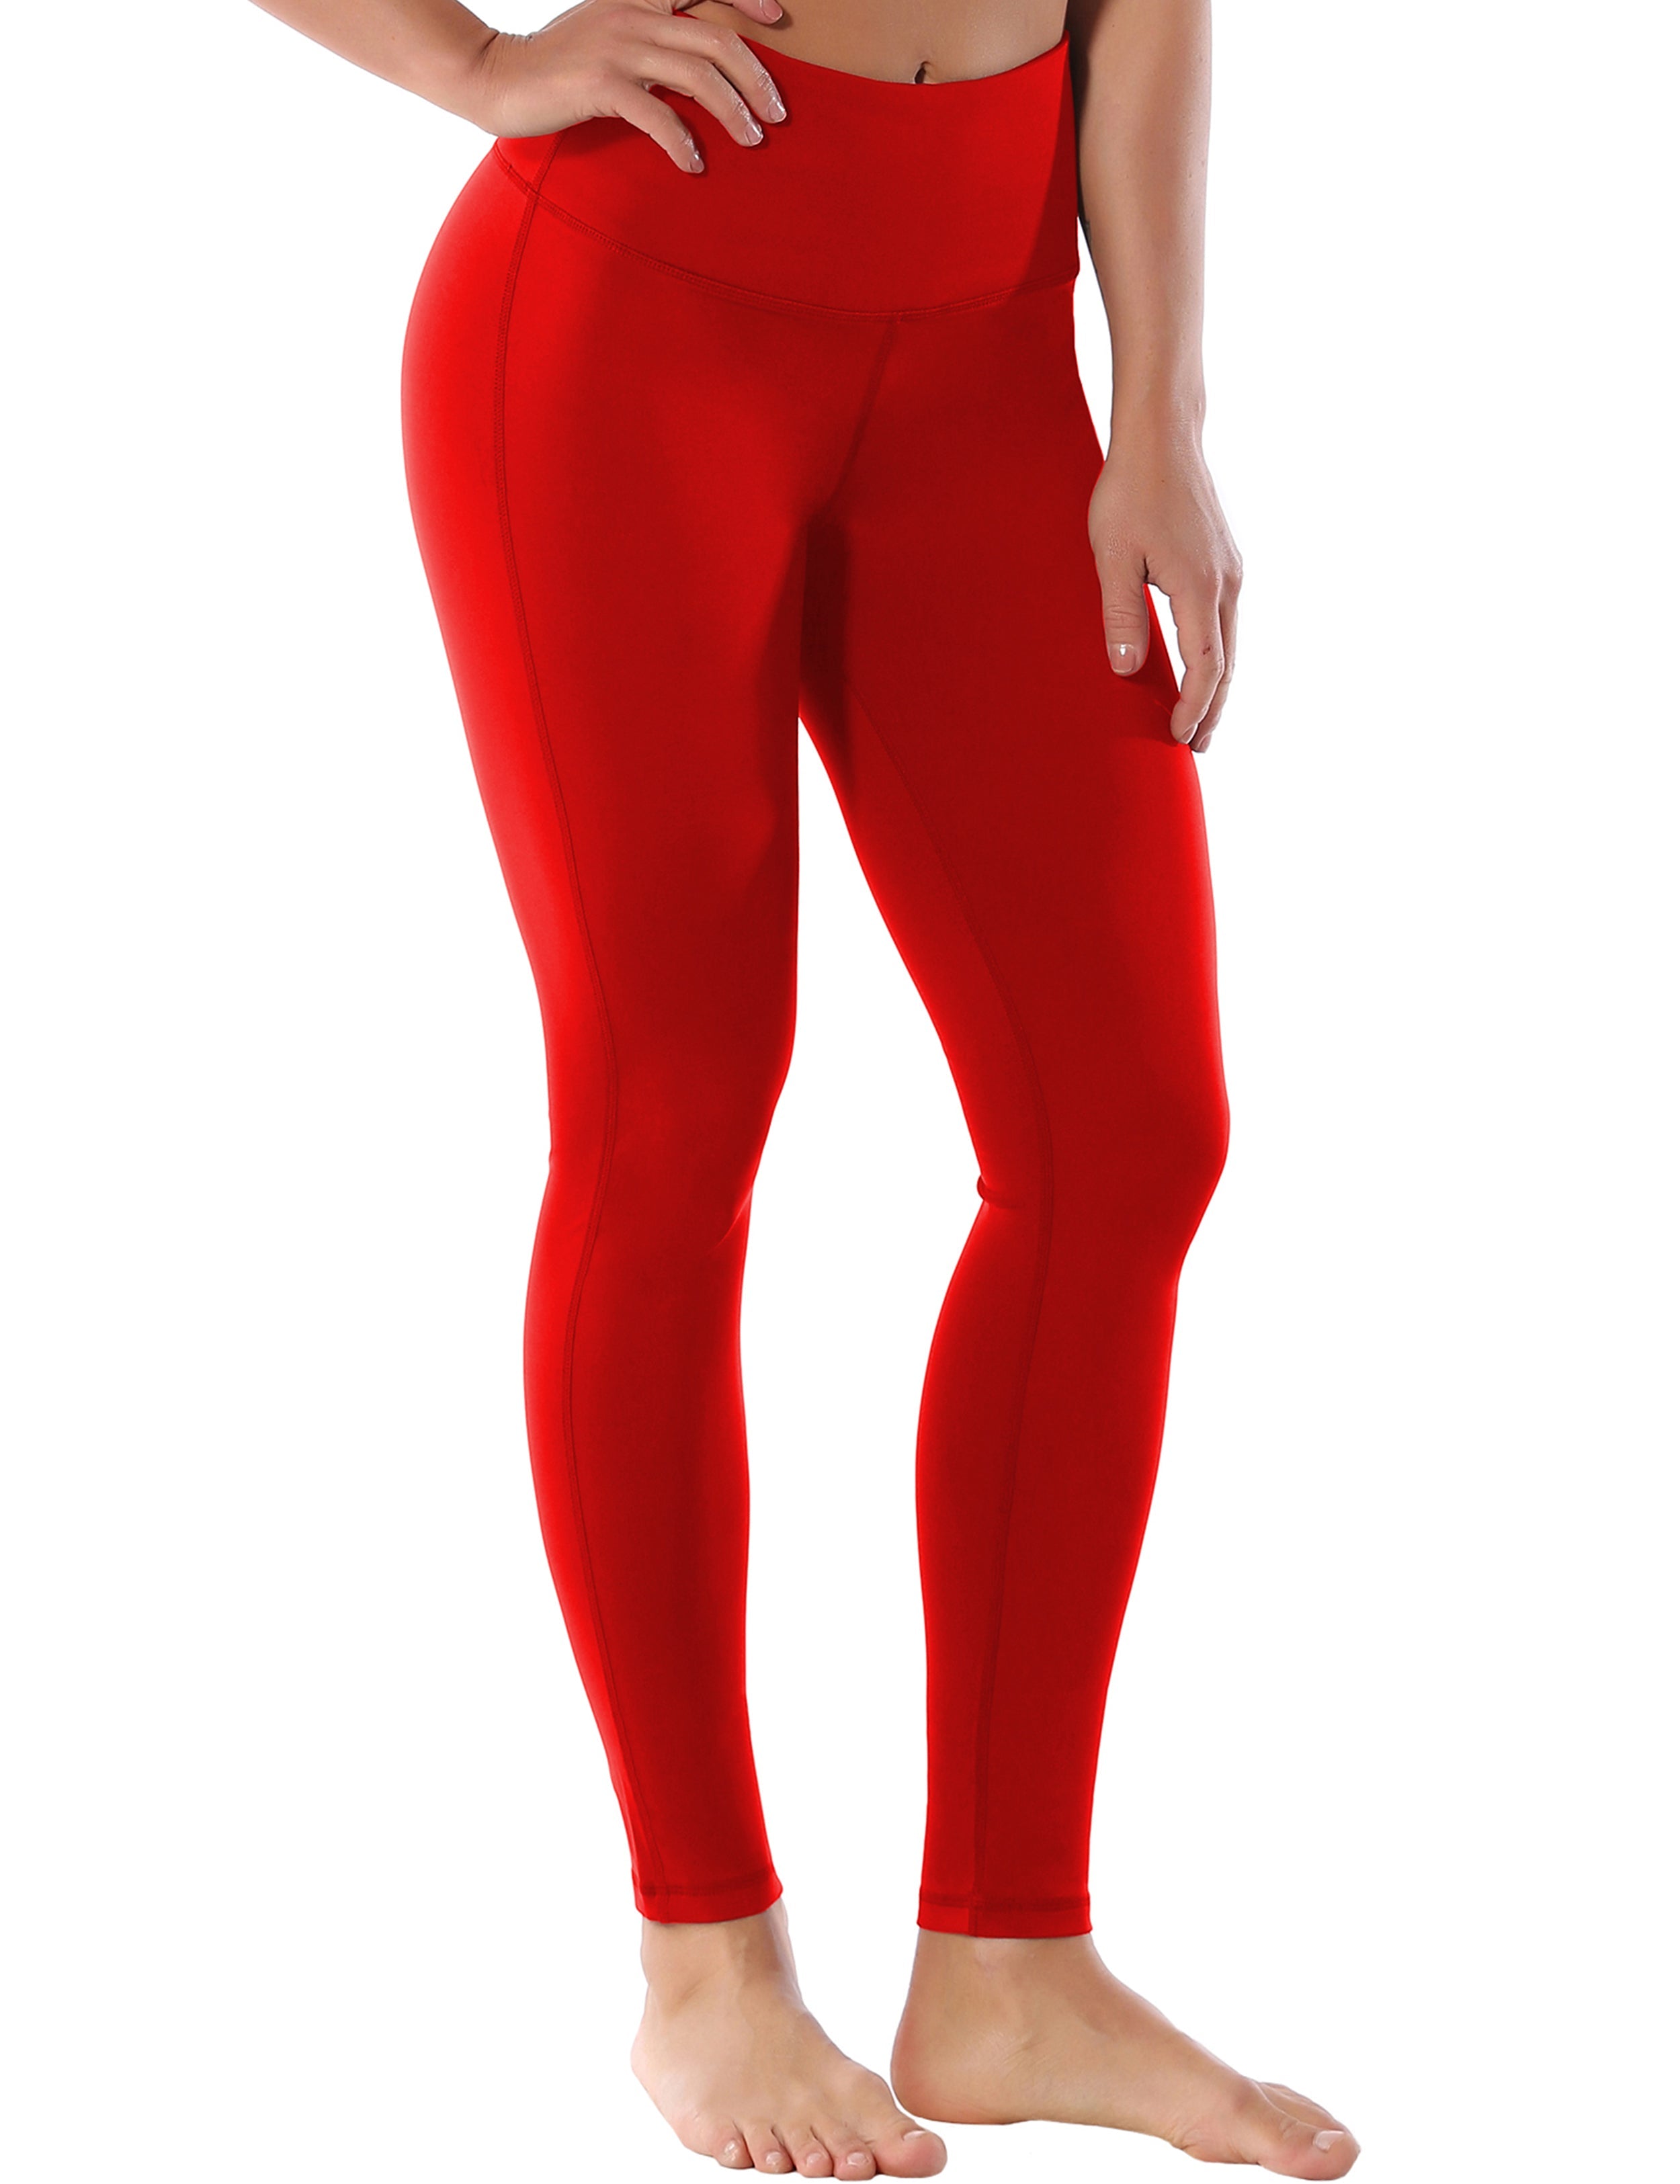 High Waist Side Line Biking Pants scarlet Side Line is Make Your Legs Look Longer and Thinner 75%Nylon/25%Spandex Fabric doesn't attract lint easily 4-way stretch No see-through Moisture-wicking Tummy control Inner pocket Two lengths